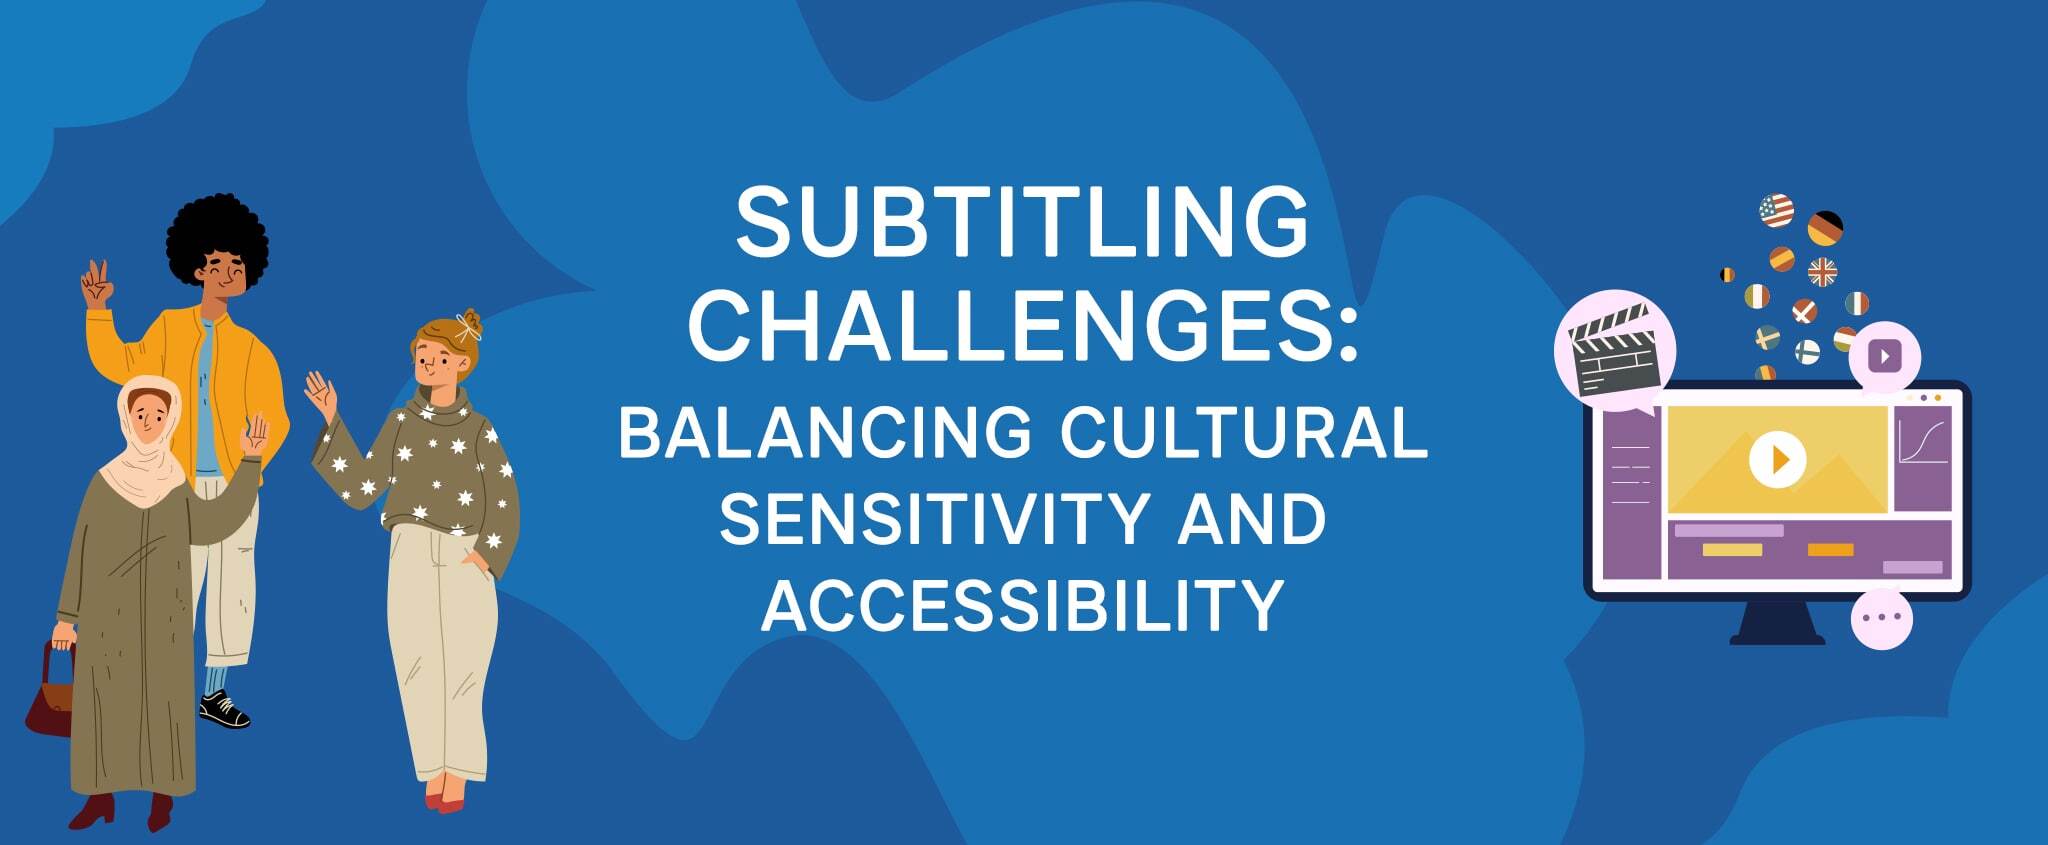 Subtitling Challenges: Balancing Cultural Sensitivity and Accessibility